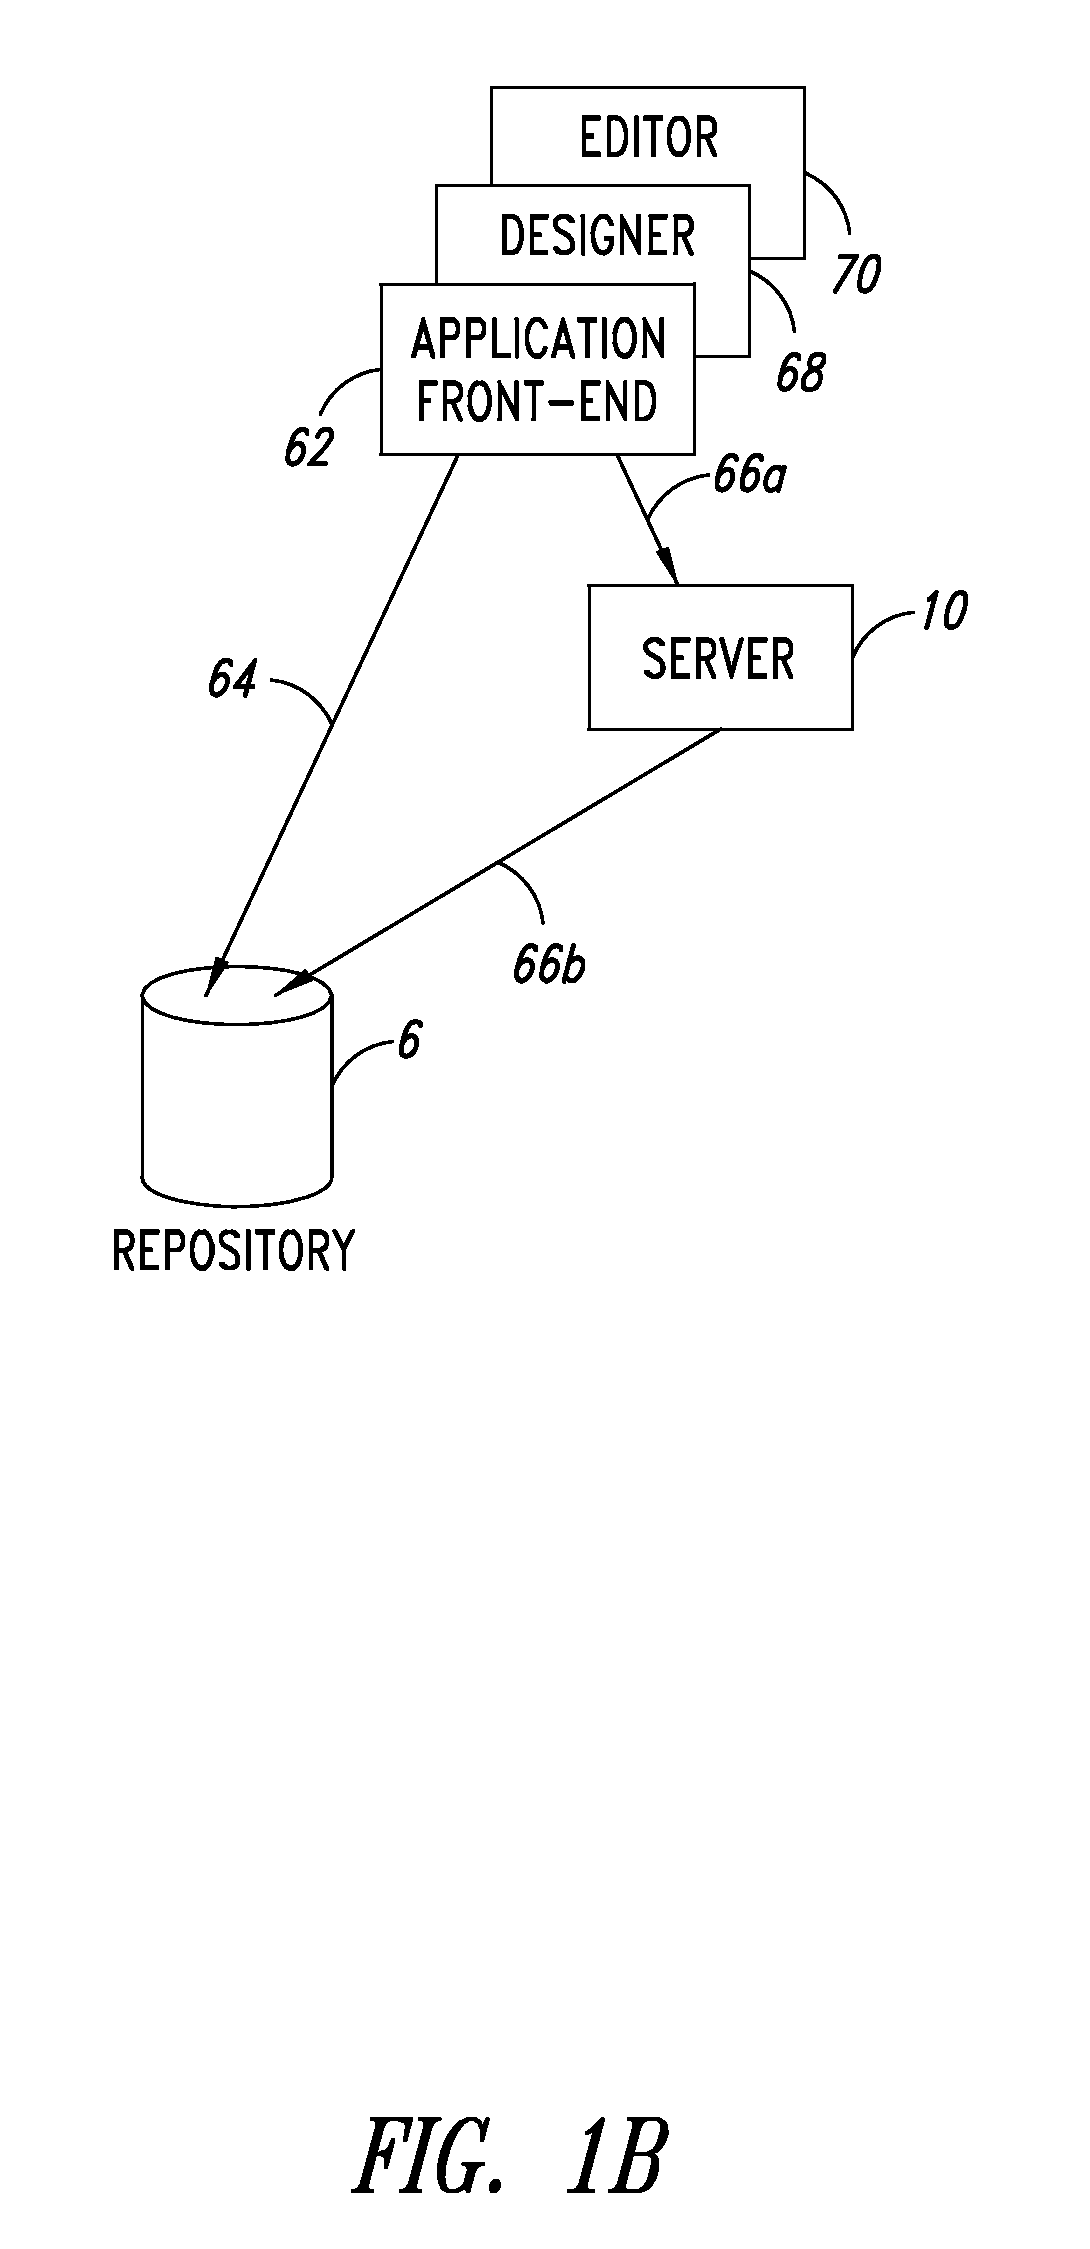 Method for automating construction of the flow of data driven applications in an entity model